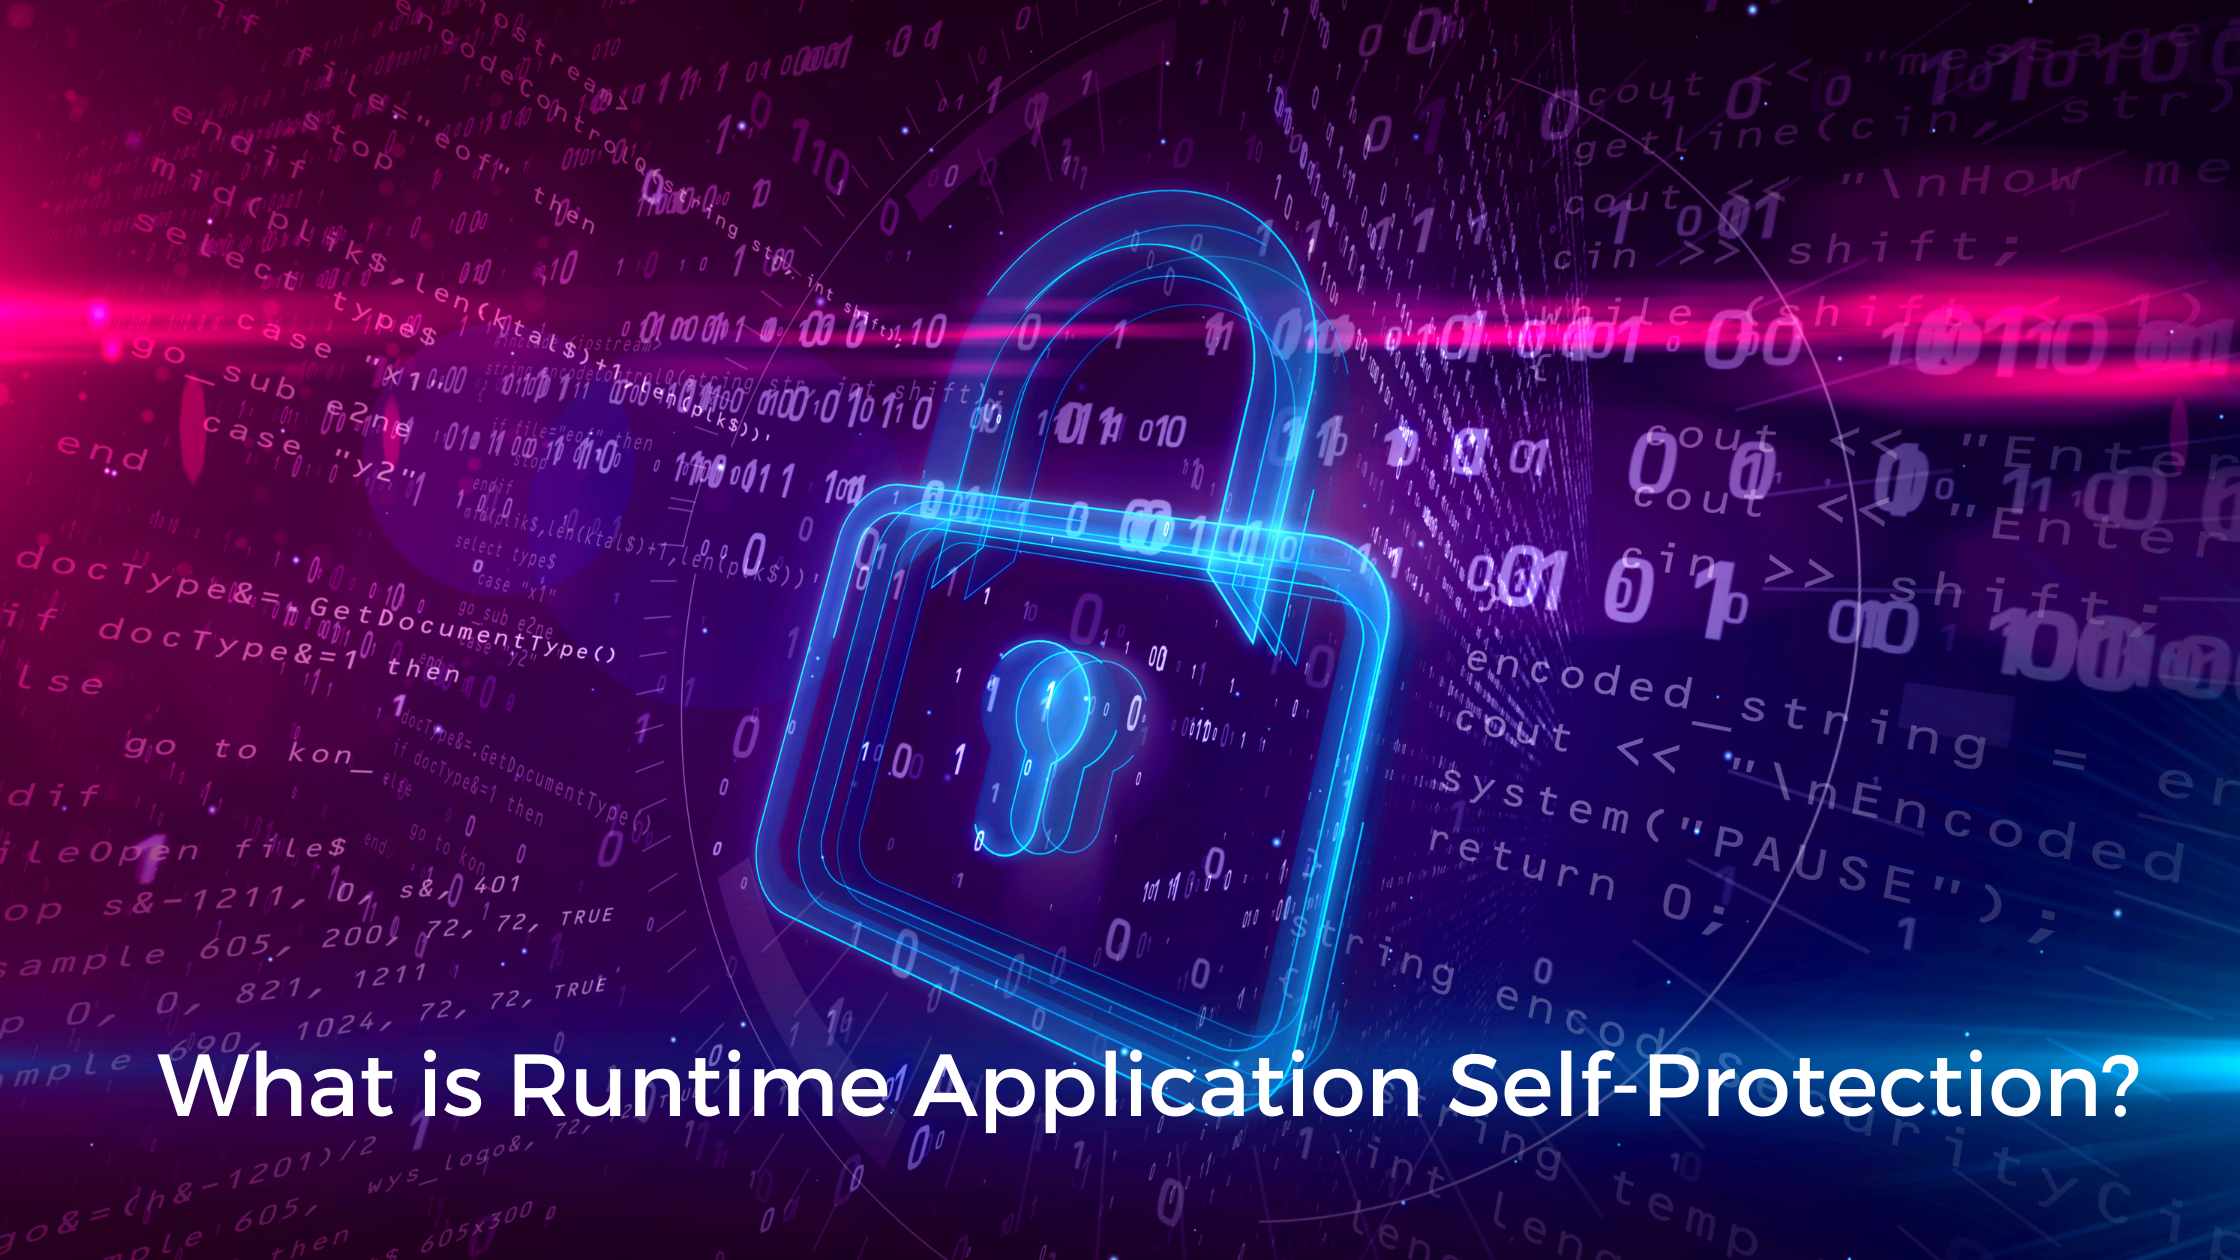 Cybersecurity concept with text What is Runtime Application Self-Protection